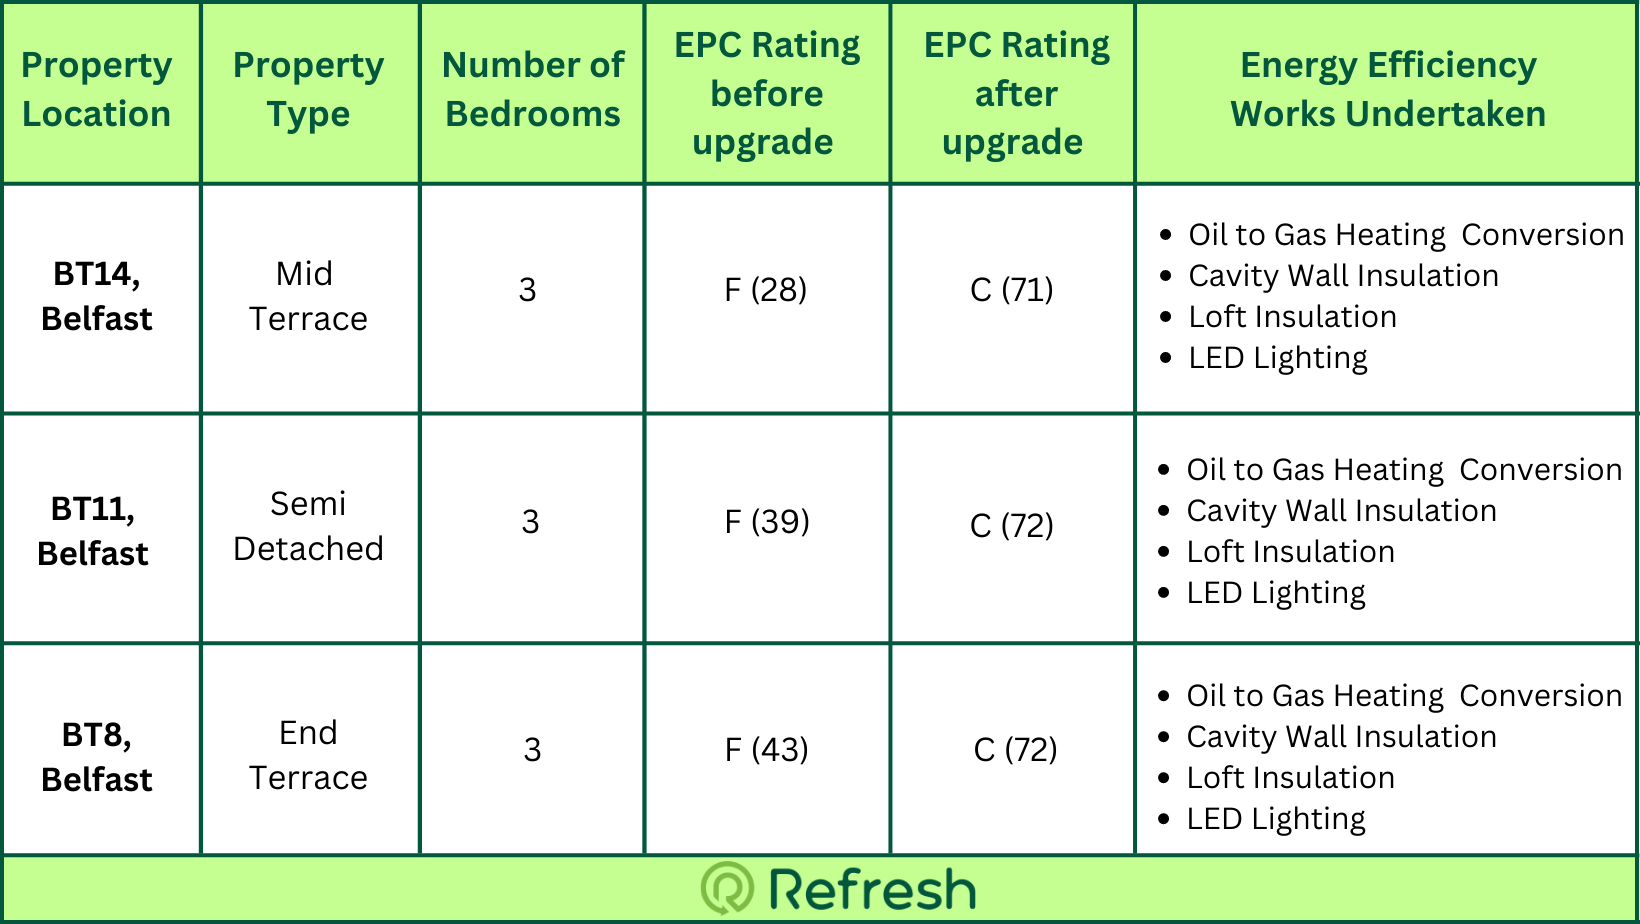 EPC Energy Rating Table showing Energy Efficient work undertaken and the results.